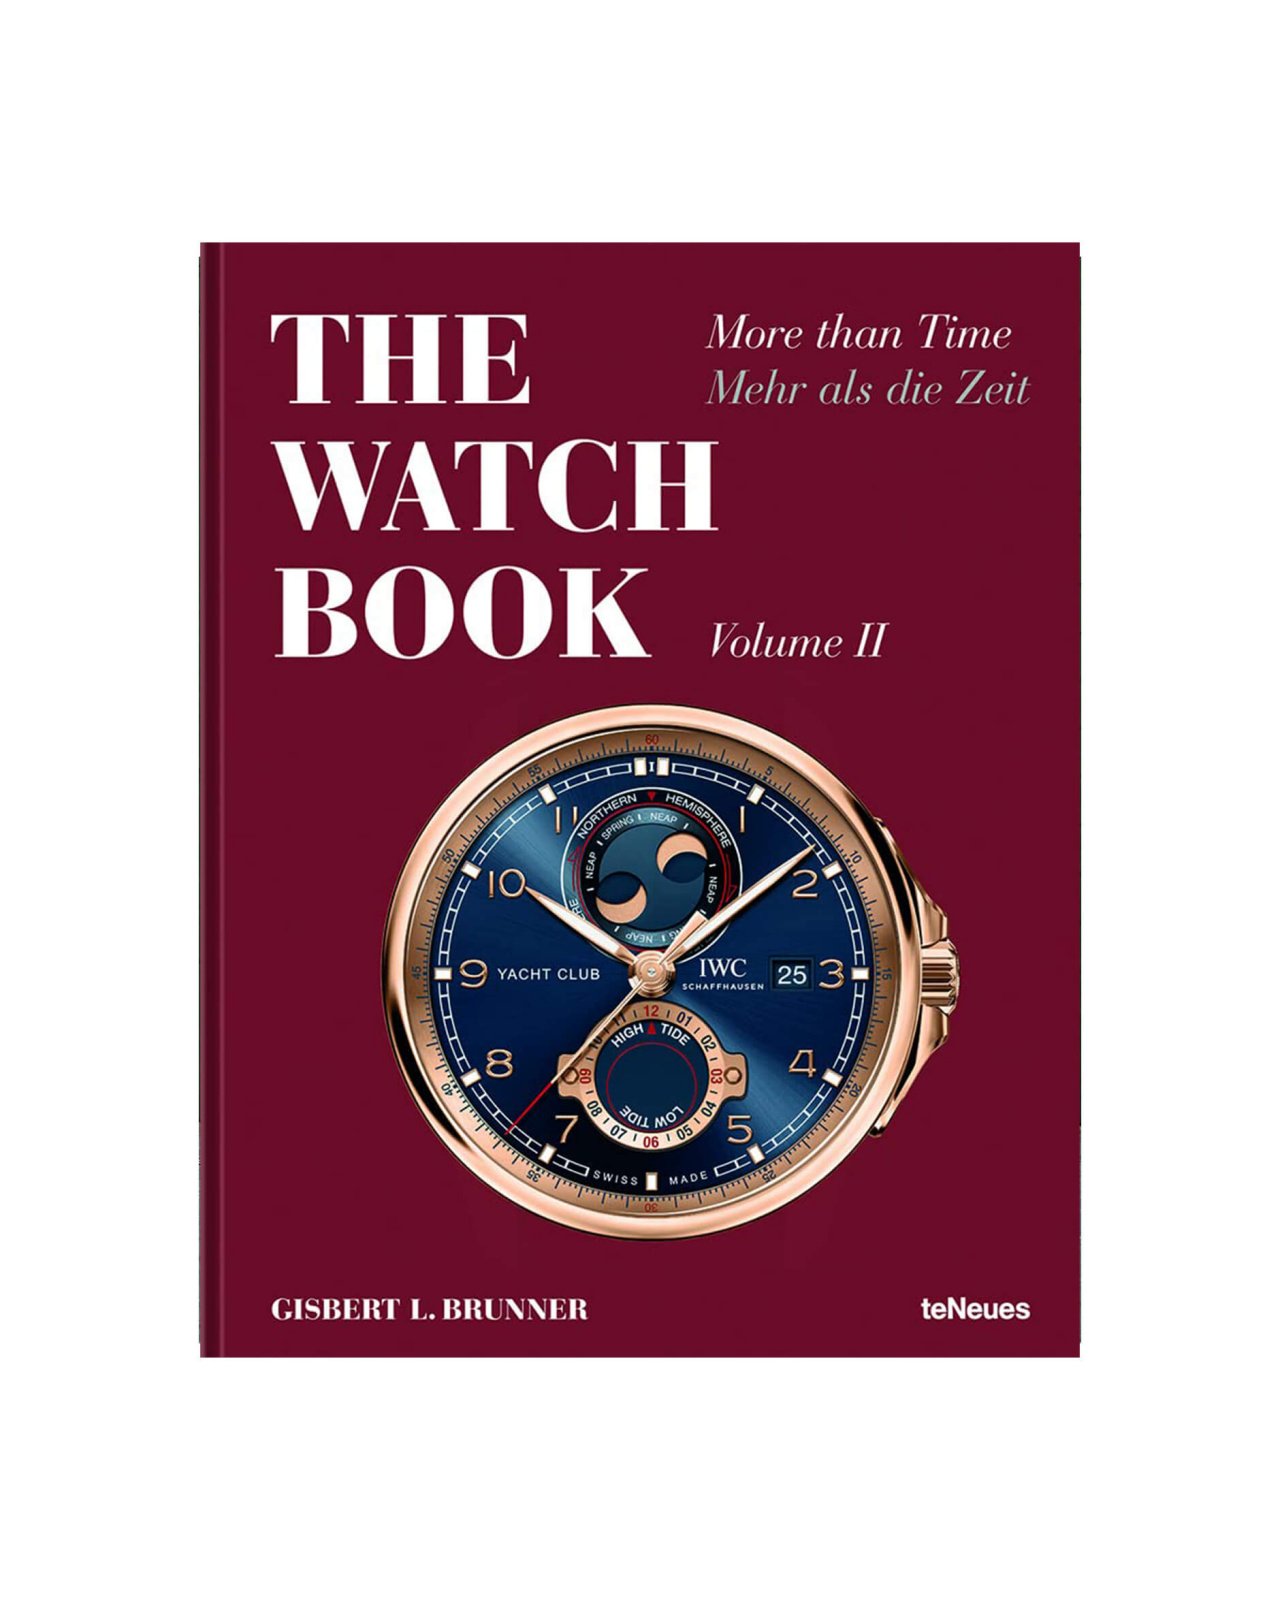 The Watch Book – More than Time Vol. 2